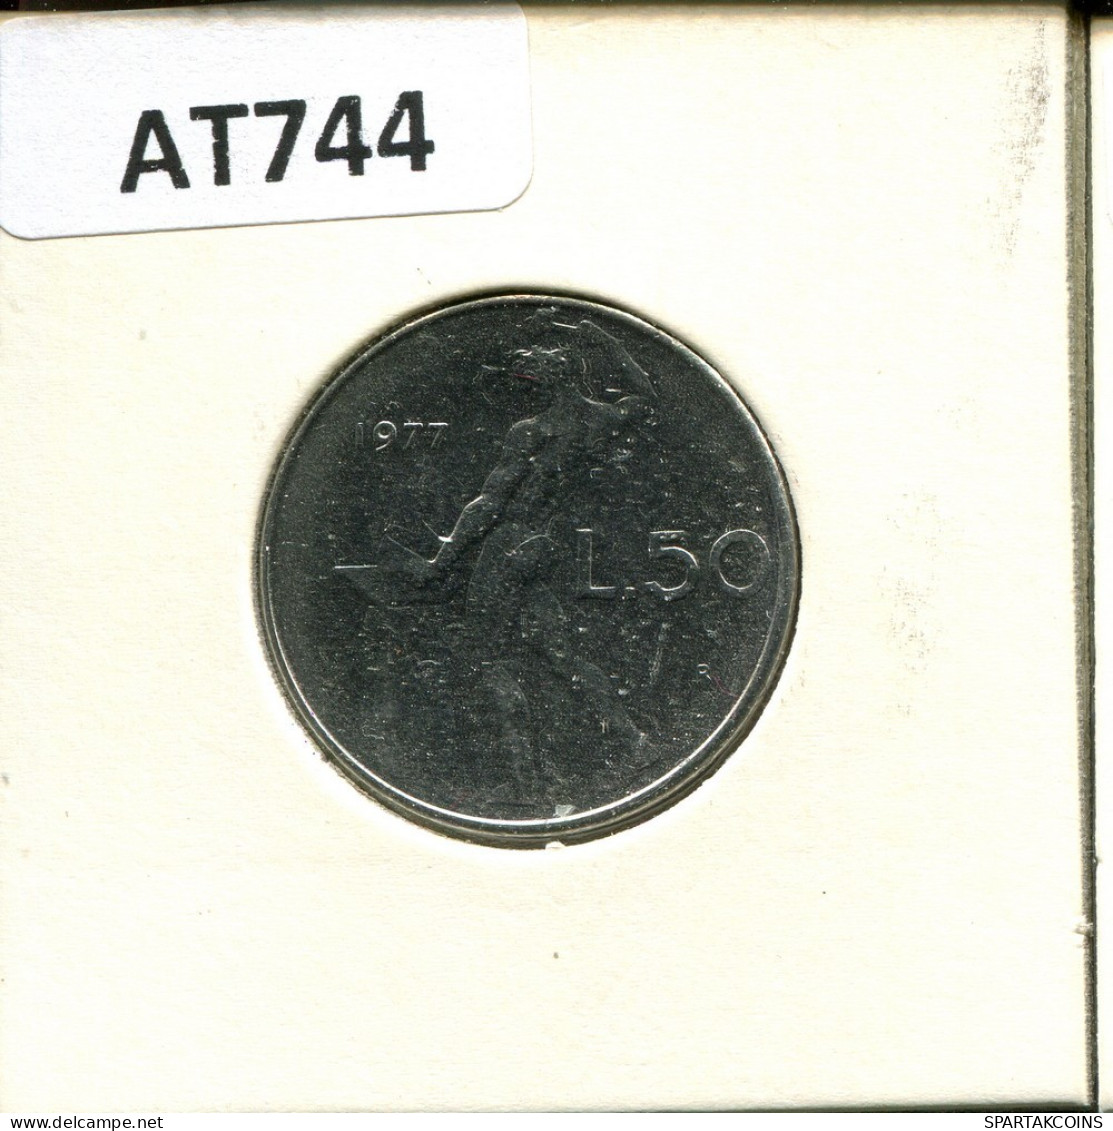 50 LIRE 1977 ITALY Coin #AT744.U.A - 50 Lire